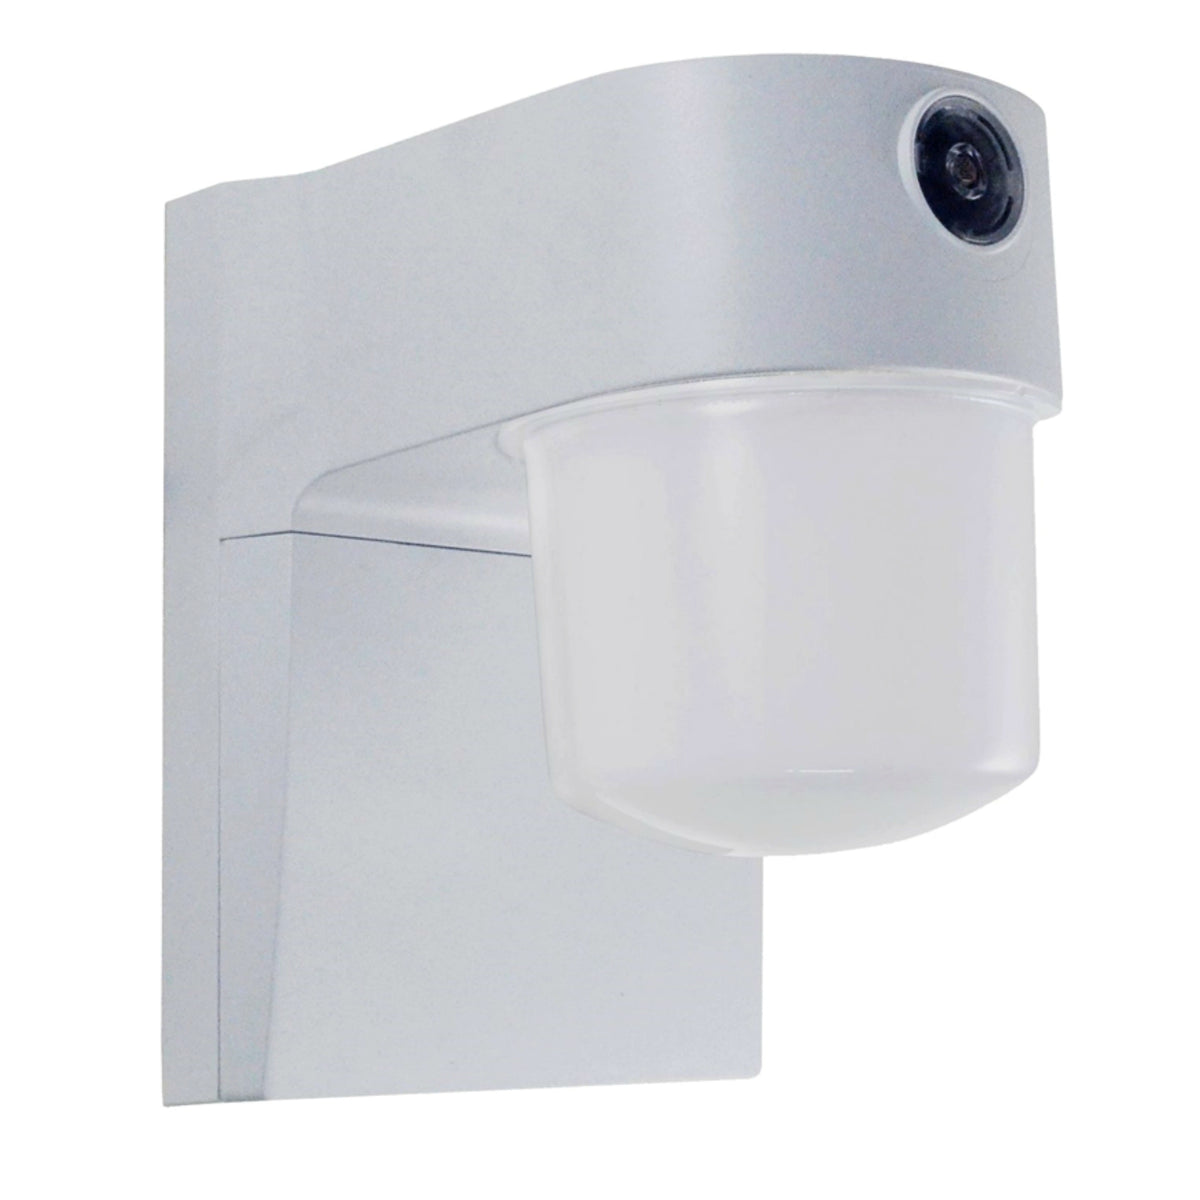 buy outdoor motion sensor lights and kits at cheap rate in bulk. wholesale & retail lamp parts & accessories store. home décor ideas, maintenance, repair replacement parts